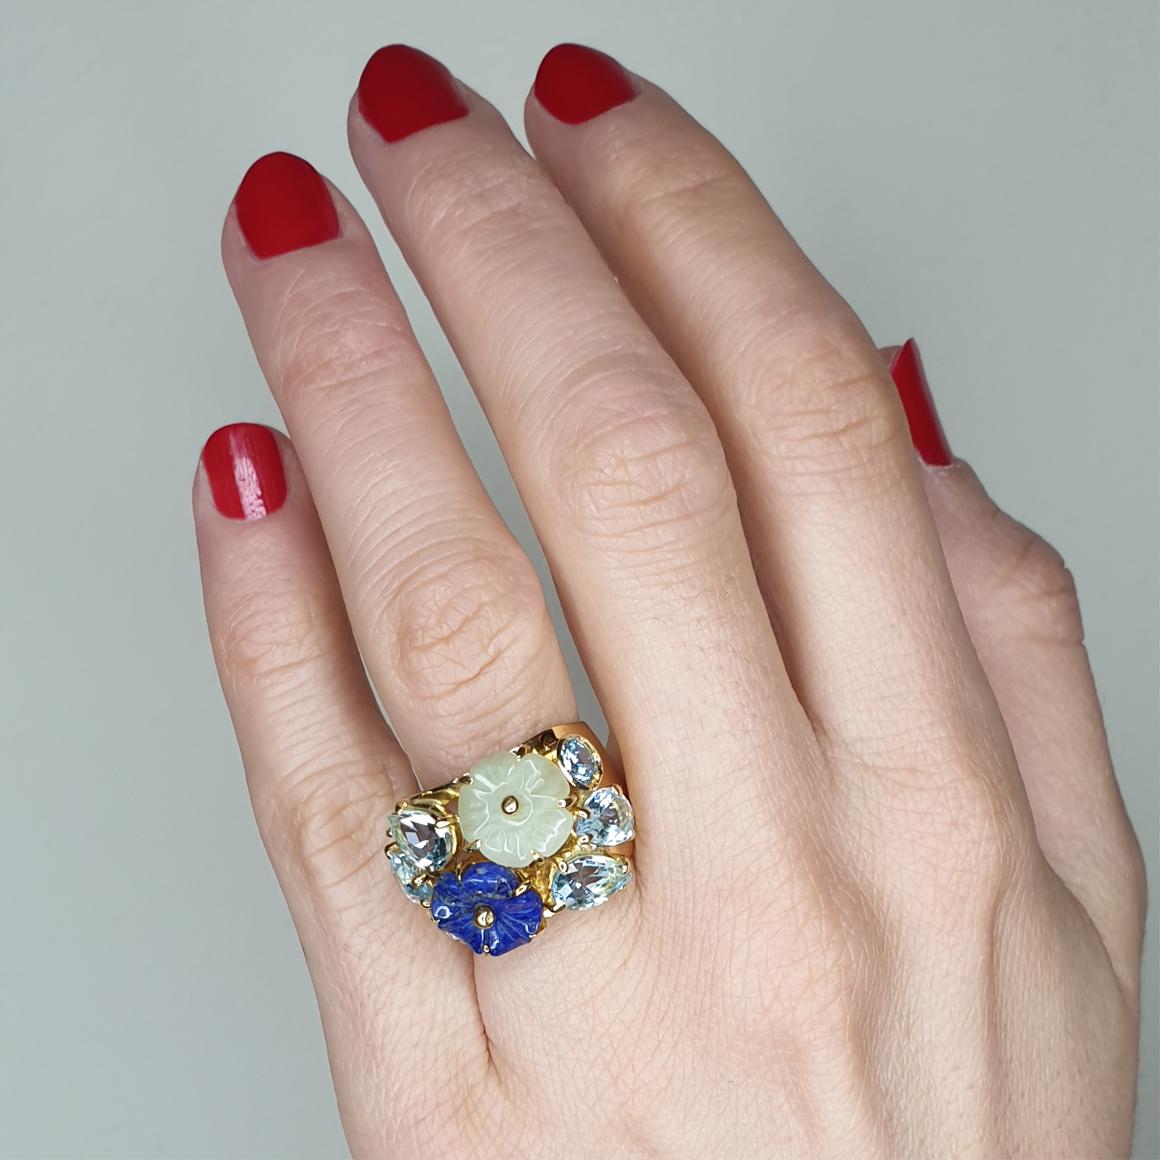 Beautiful bouchet of flowers create a unique jewel made in Italy by Stanoppi Jewellery since 1948.
Very trendy and pretty ring by Stanoppi Jewellery . The combination of colors and stones is very unique. 
flowers of Giada and Lapis ( size: 10mm),